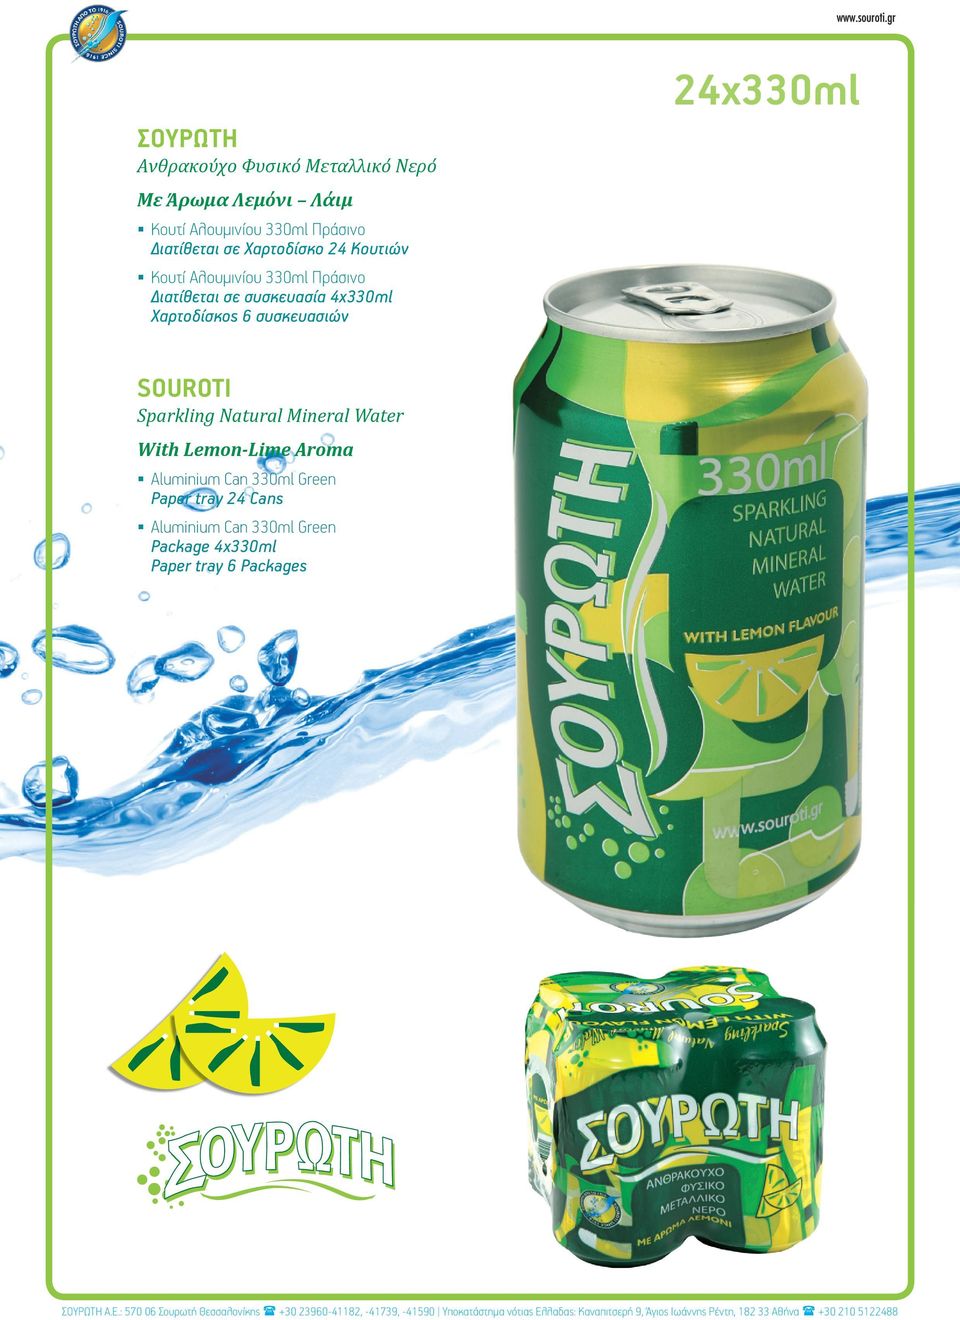 4x330ml Χαρτοδίσκος 6 συσκευασιών SOUROTI Sparkling Natural Mineral Water With Lemon-Lime Aroma